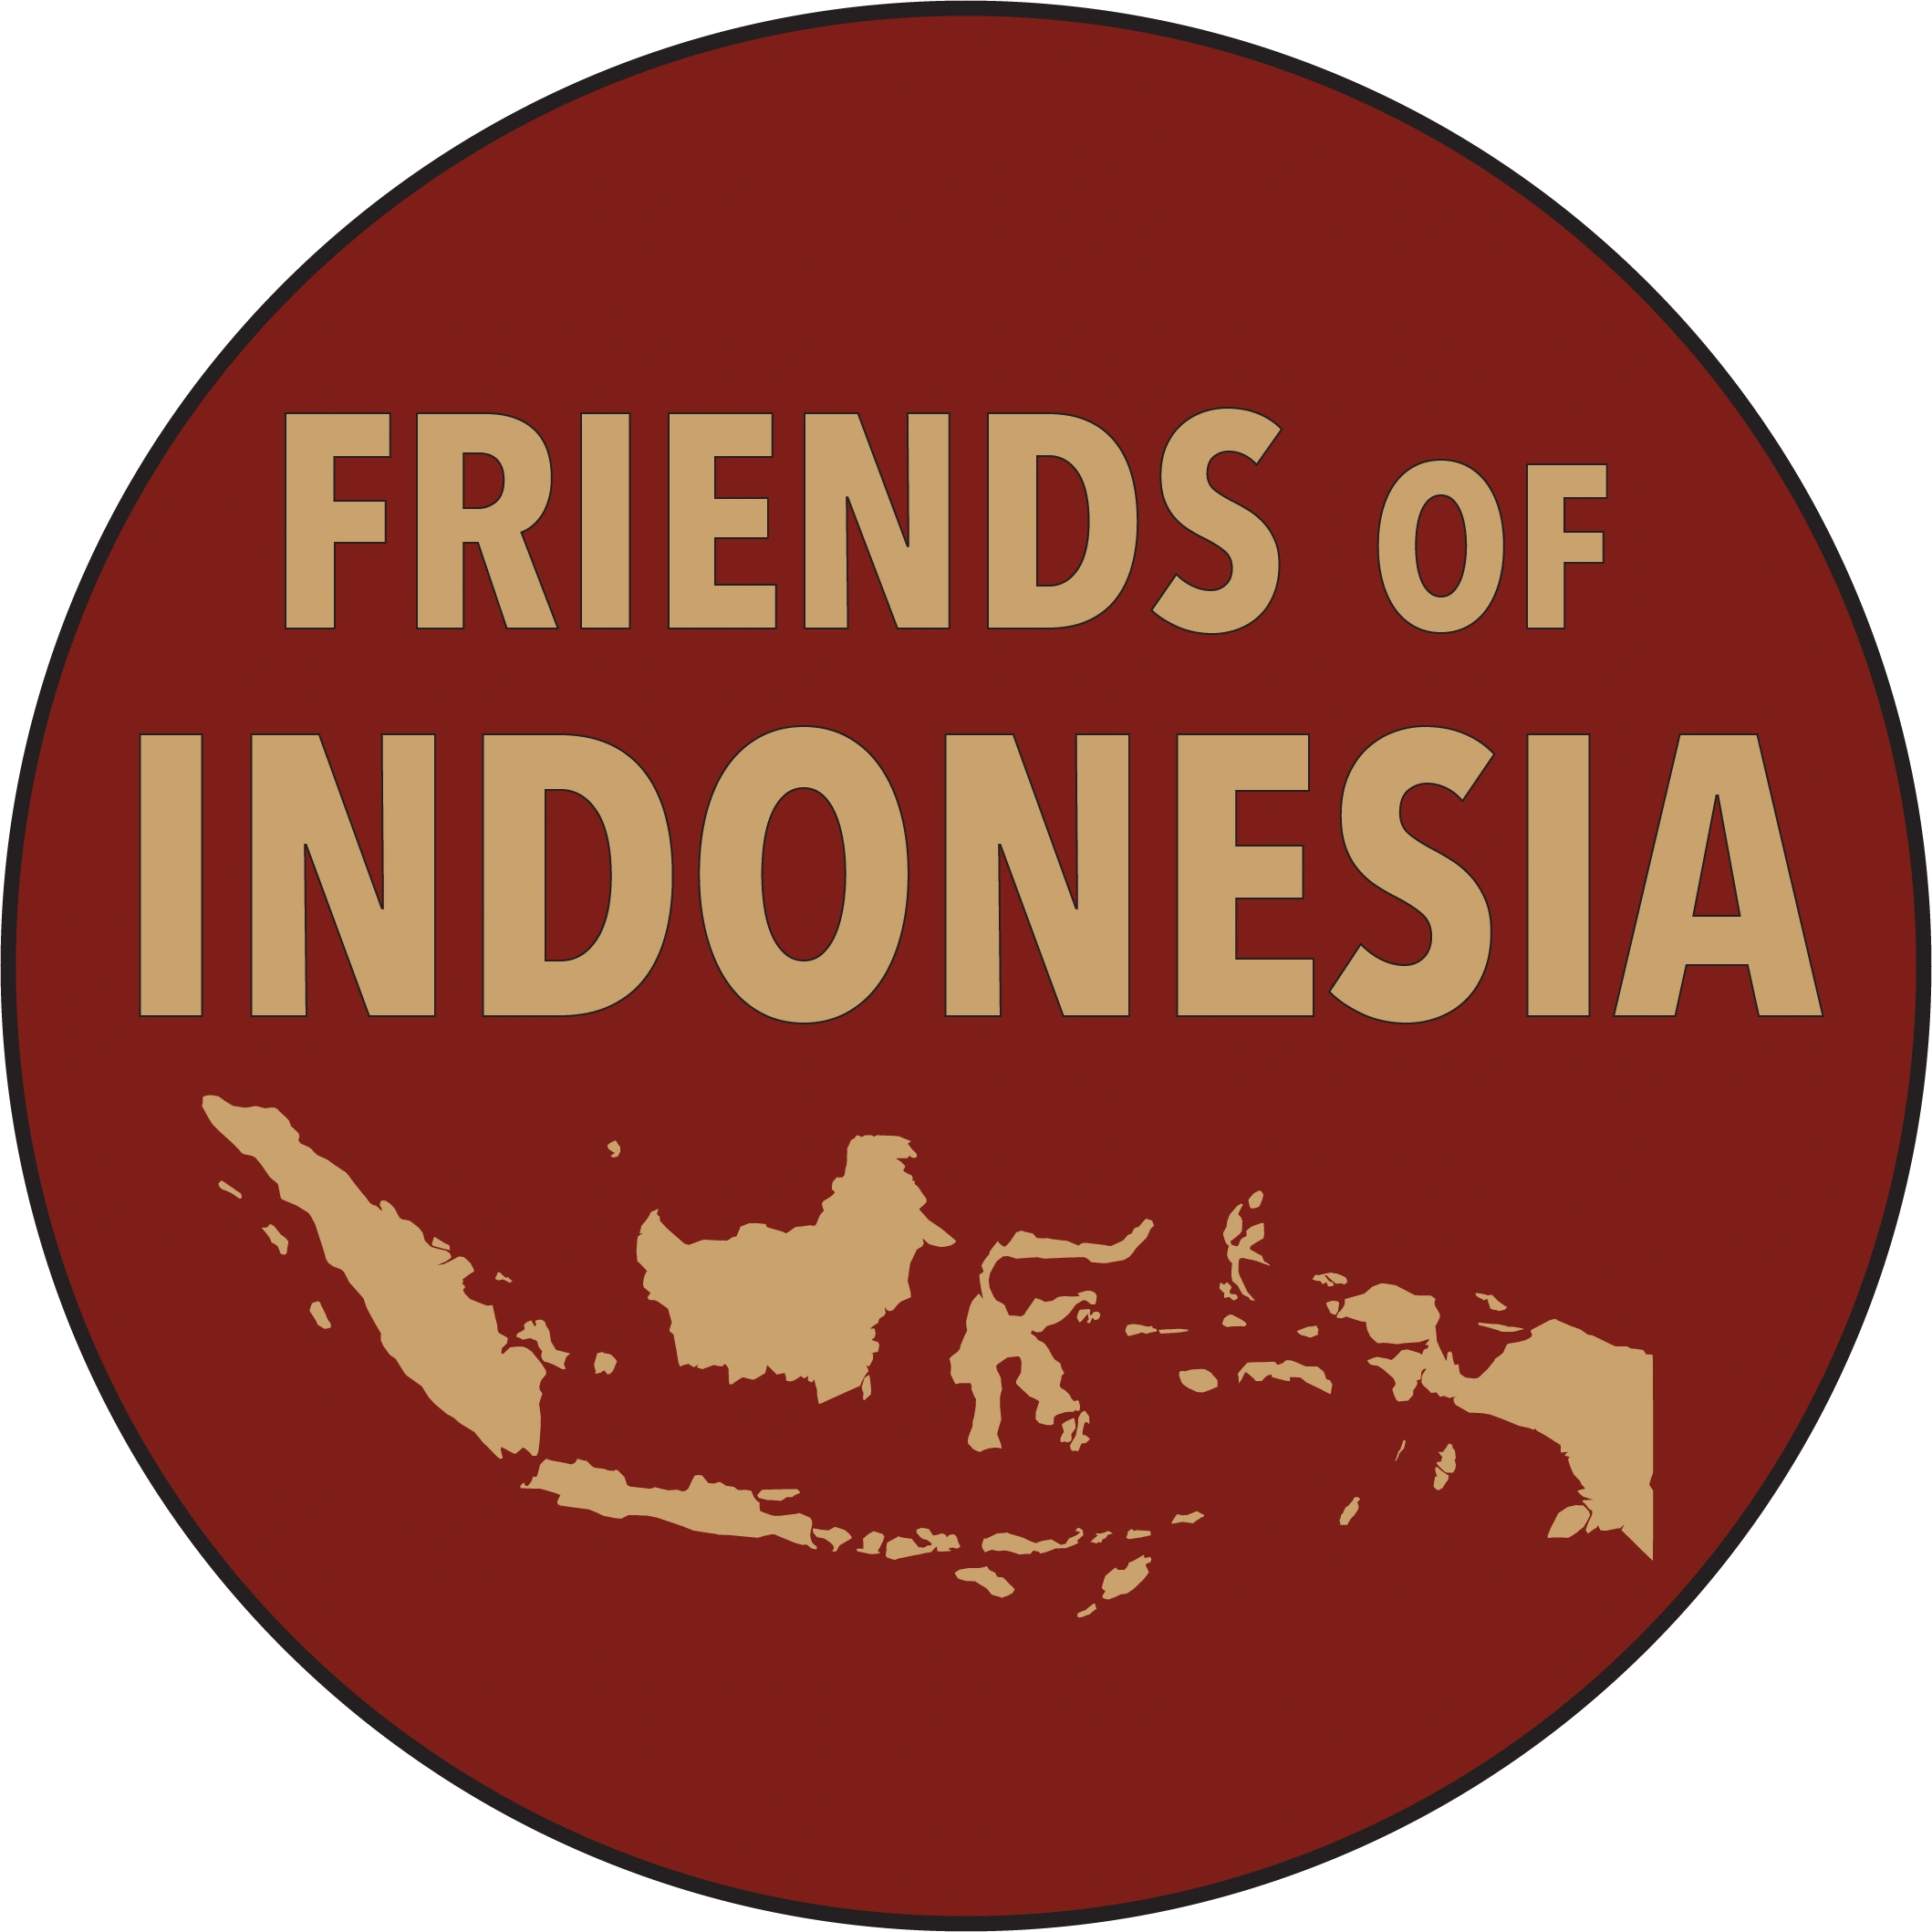 Friends of Indonesia